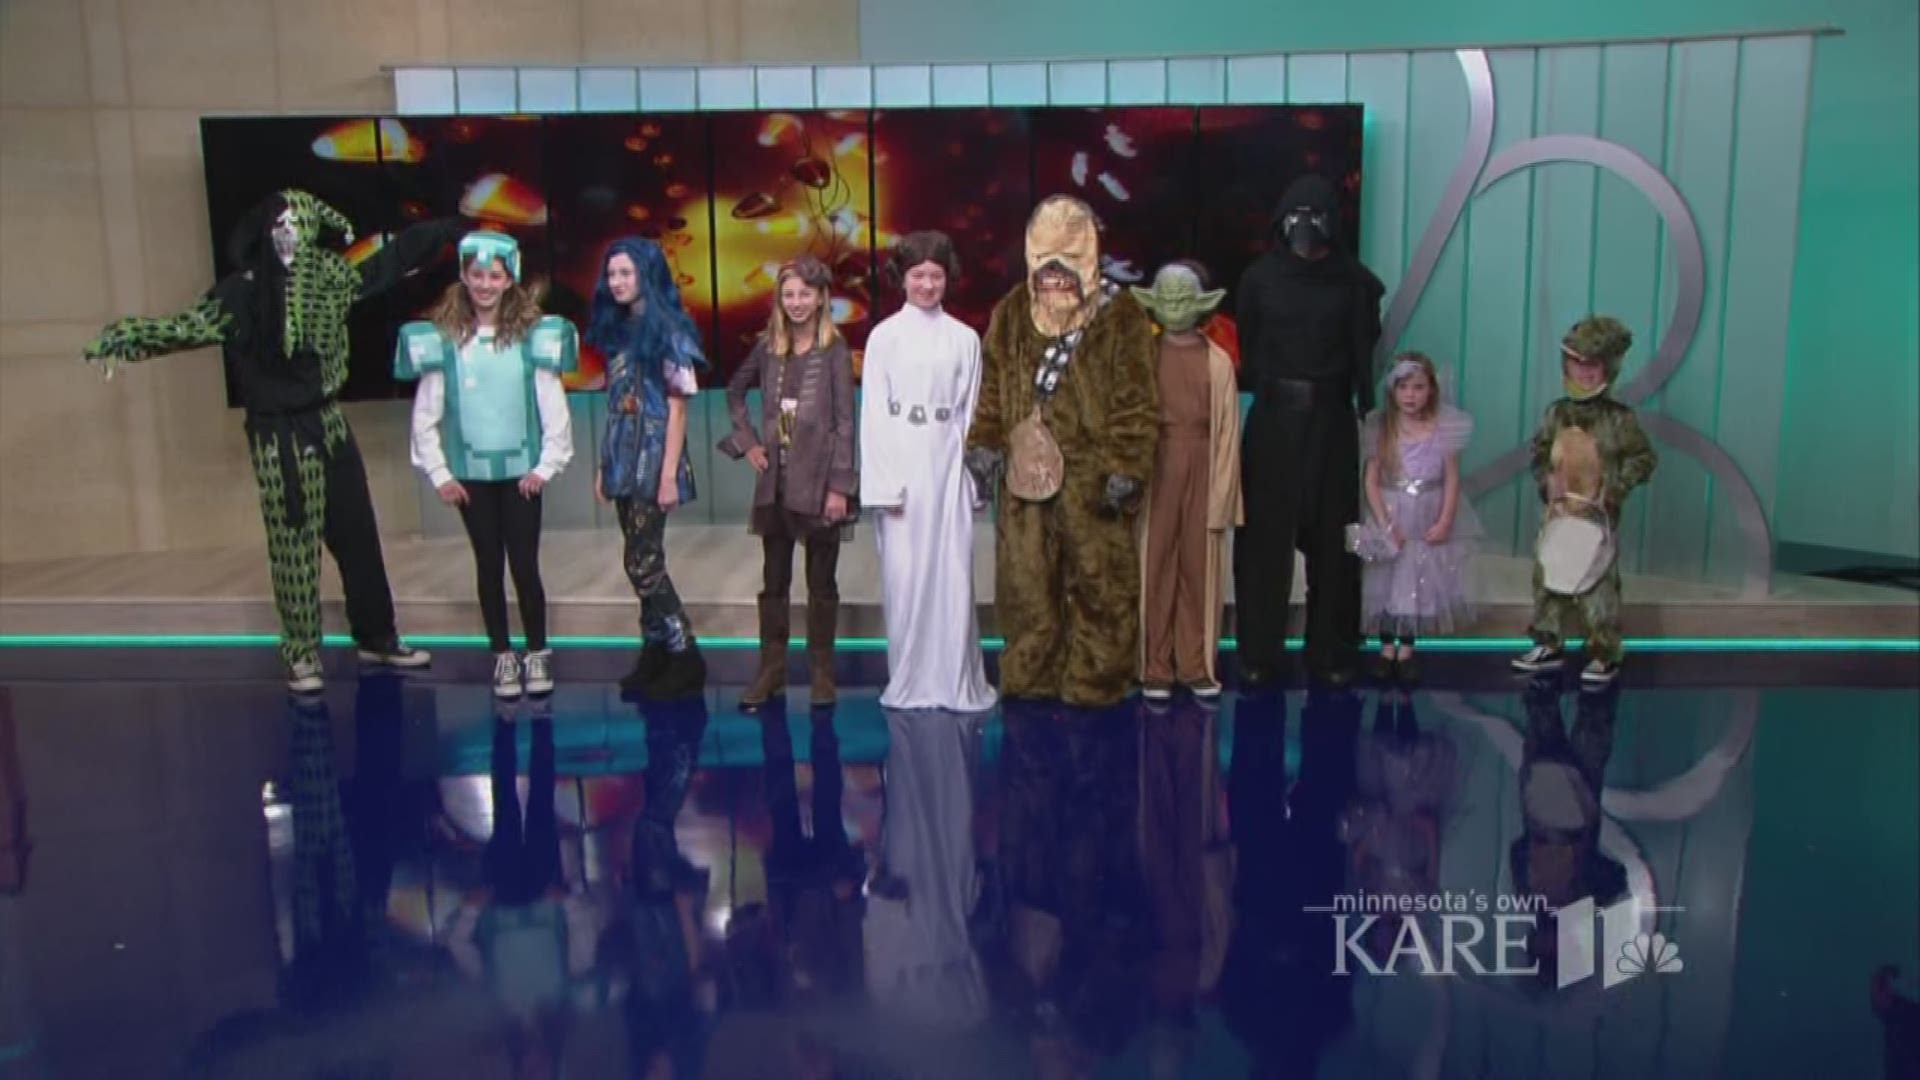 Katie Welch Len tells us about the Spook-tacular Halloween Carnival Ball that takes place on Friday, October 20th at Shoppes at Arbor Lakes. A night filled with fun, games, and awesome Halloween costumes.